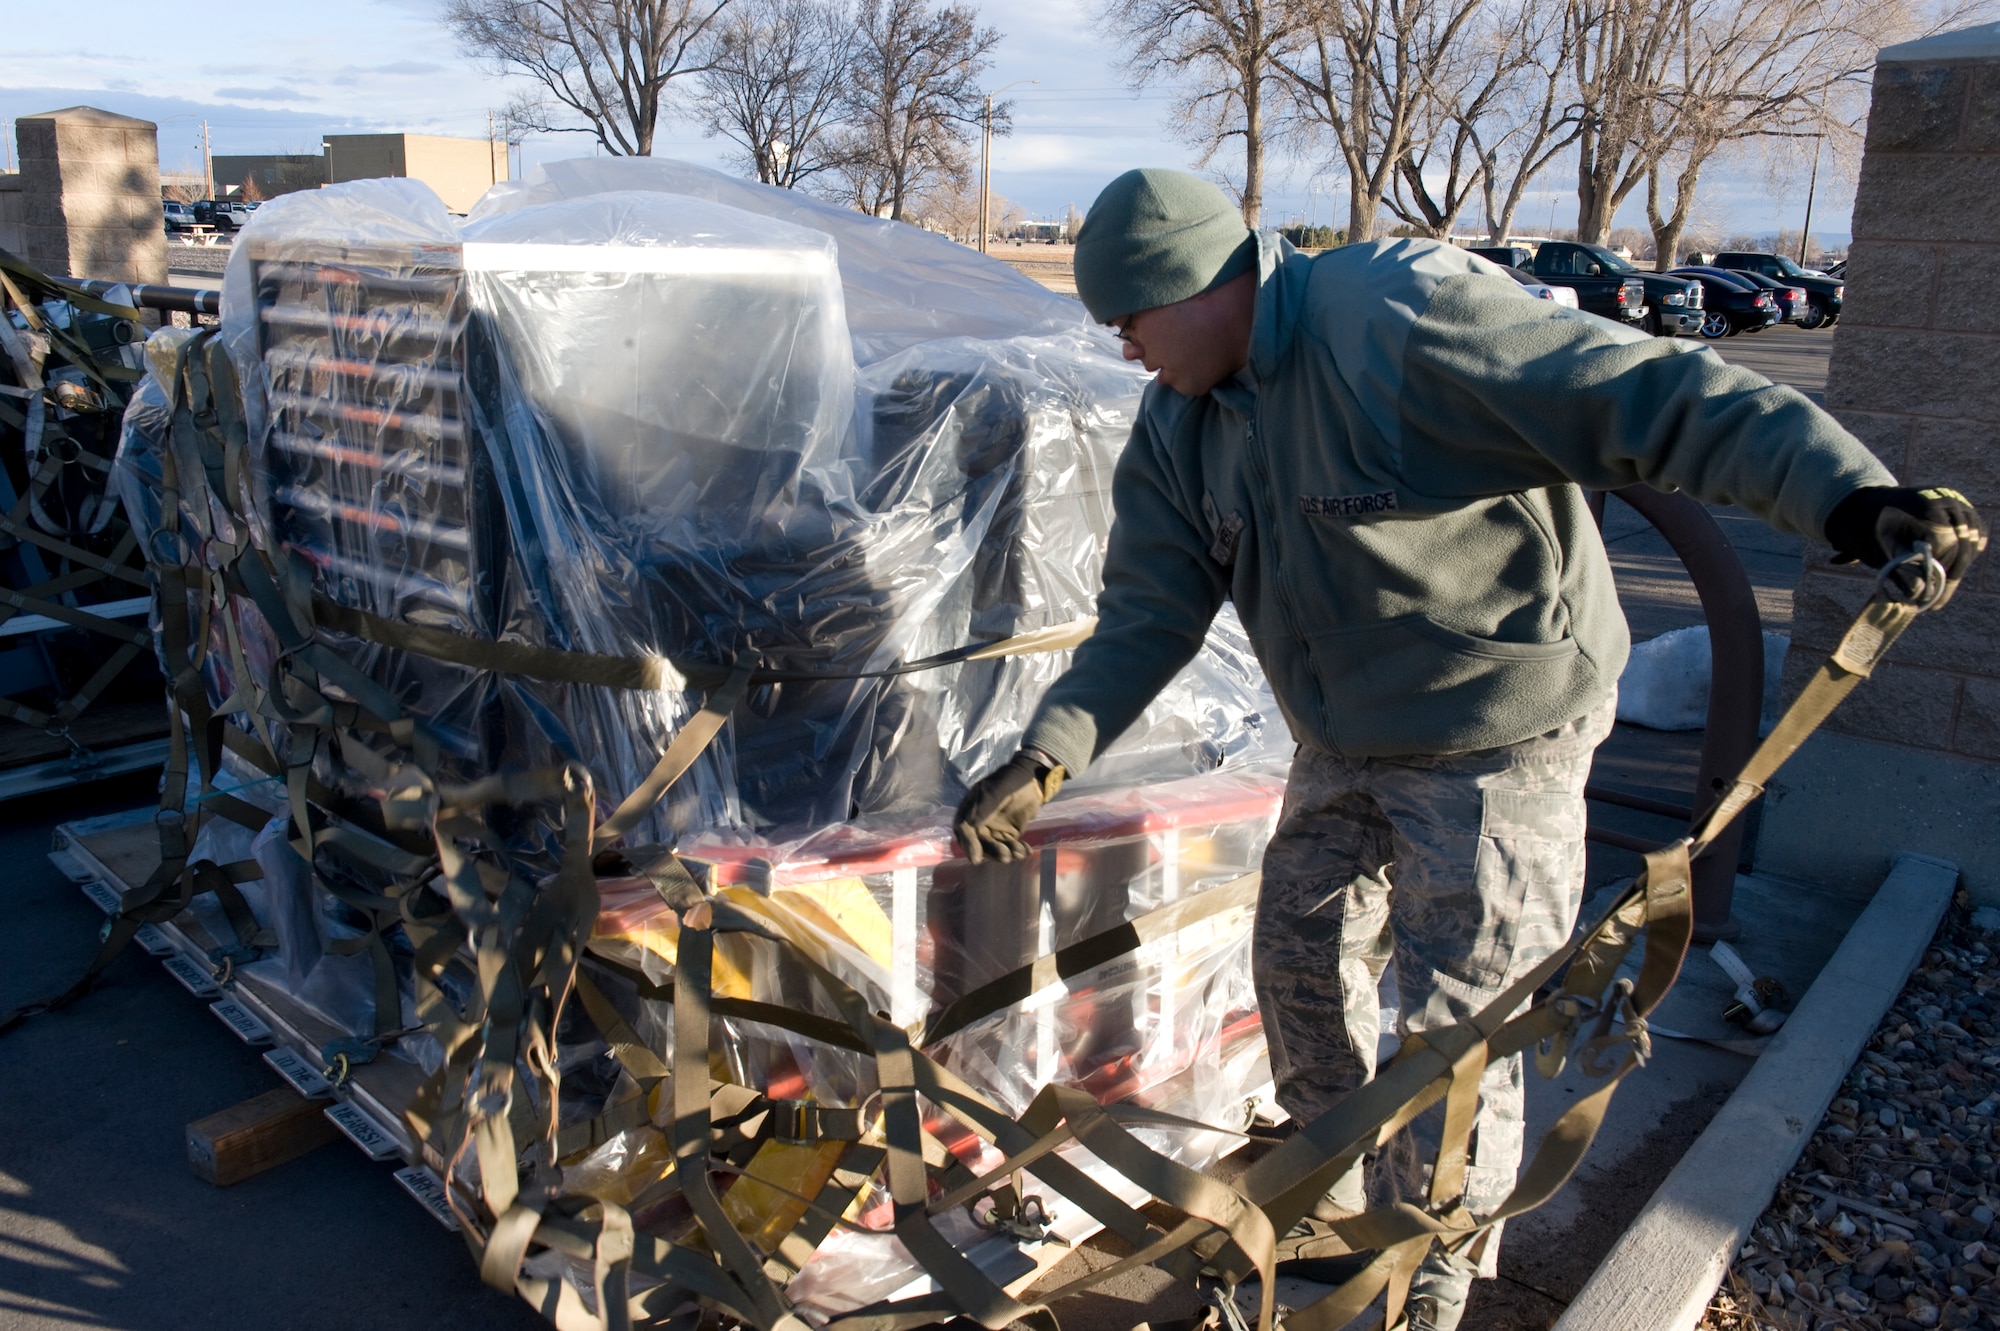 U.S. Air Force Senior Airman Jomar Rivera, 389th Aircraft Maintenance Unit crewchief, pulls off a cargo net from a pallet of equipment Feb. 19, 2013, at Mountain Home Air Force Base, Idaho. Rivera unloaded all of the equipment previously packed during a base-wide operational readiness exercise, Sharpshooter 13-2. (U.S. Air Force photo/Airman 1st Class Brittany Chase)